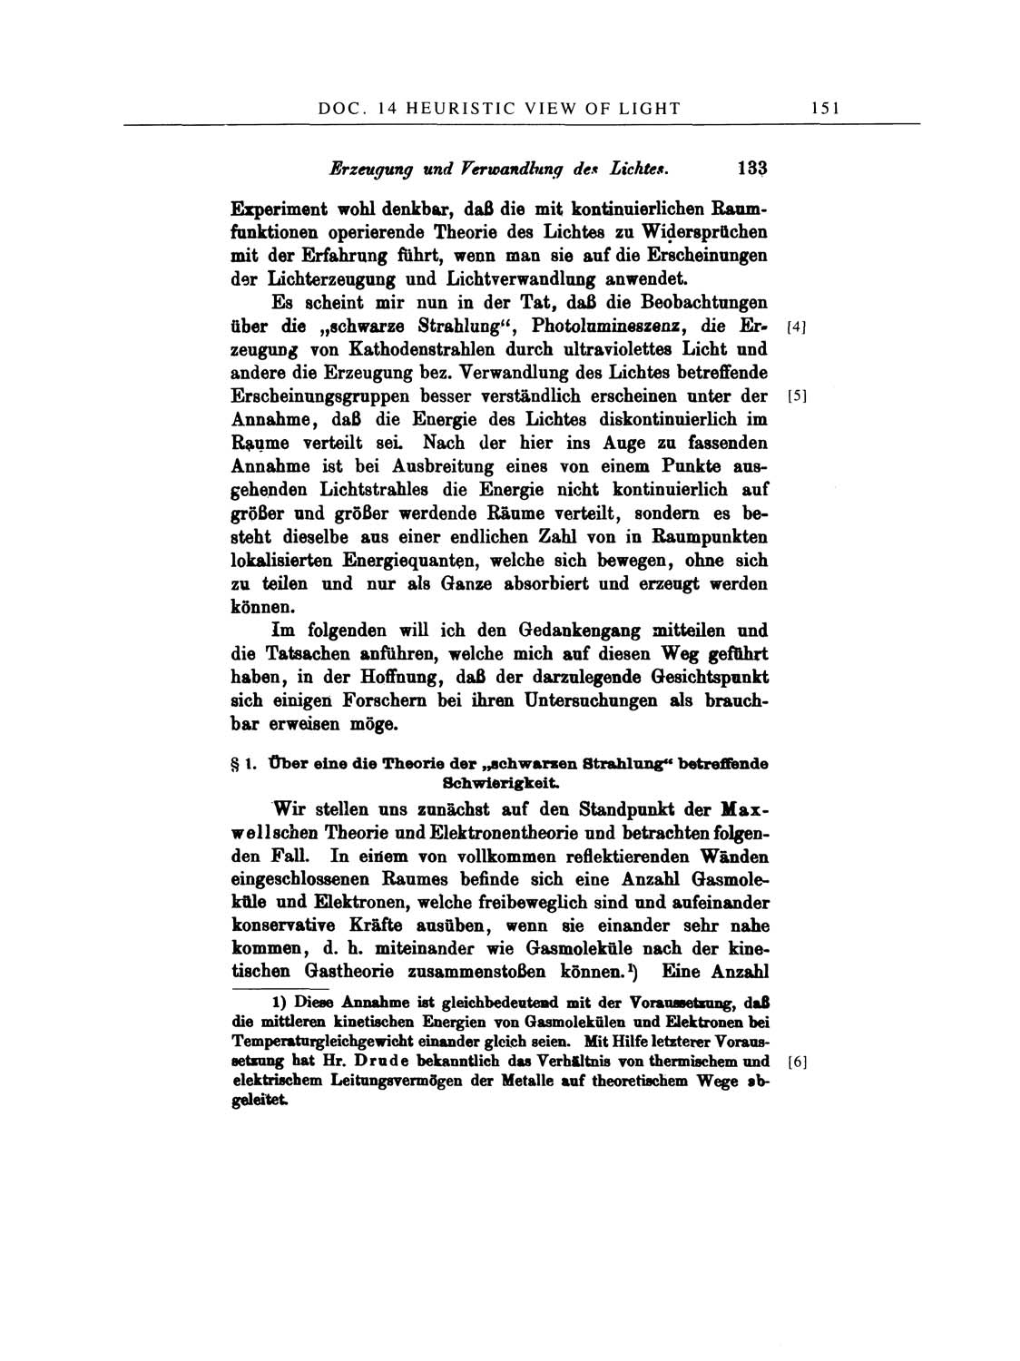 Volume 2: The Swiss Years: Writings, 1900-1909 page 151